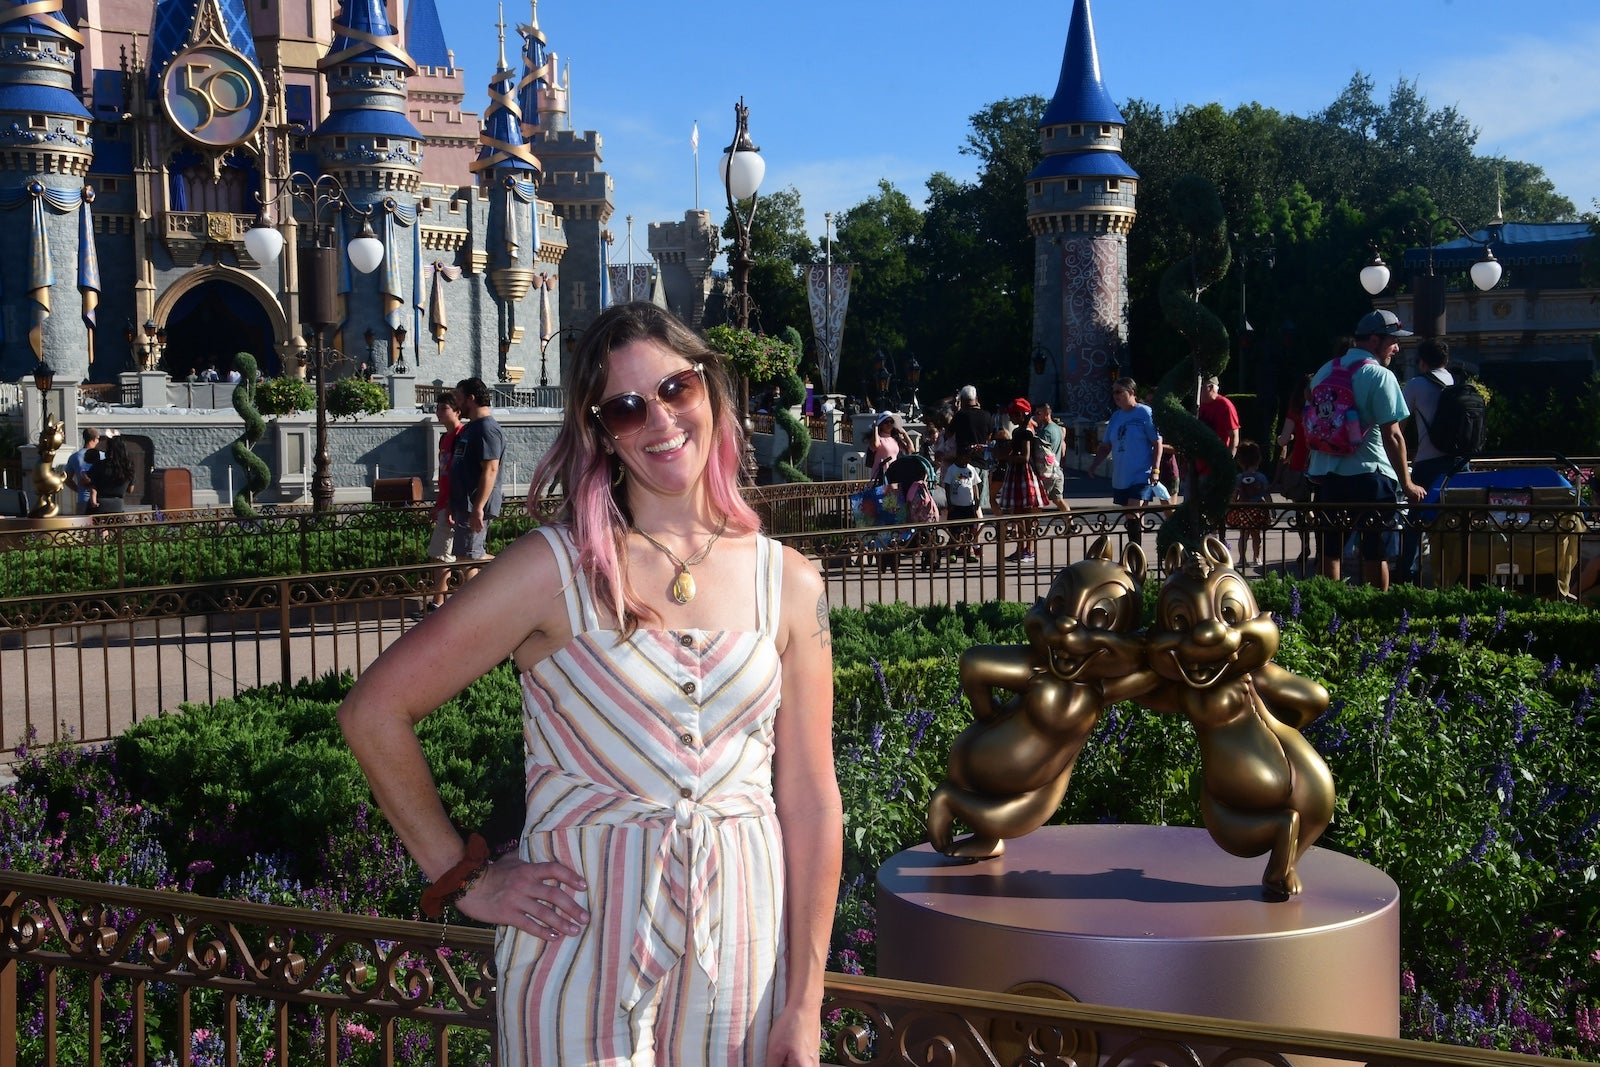 PhotoPass photographers can help capture your vacation memories.